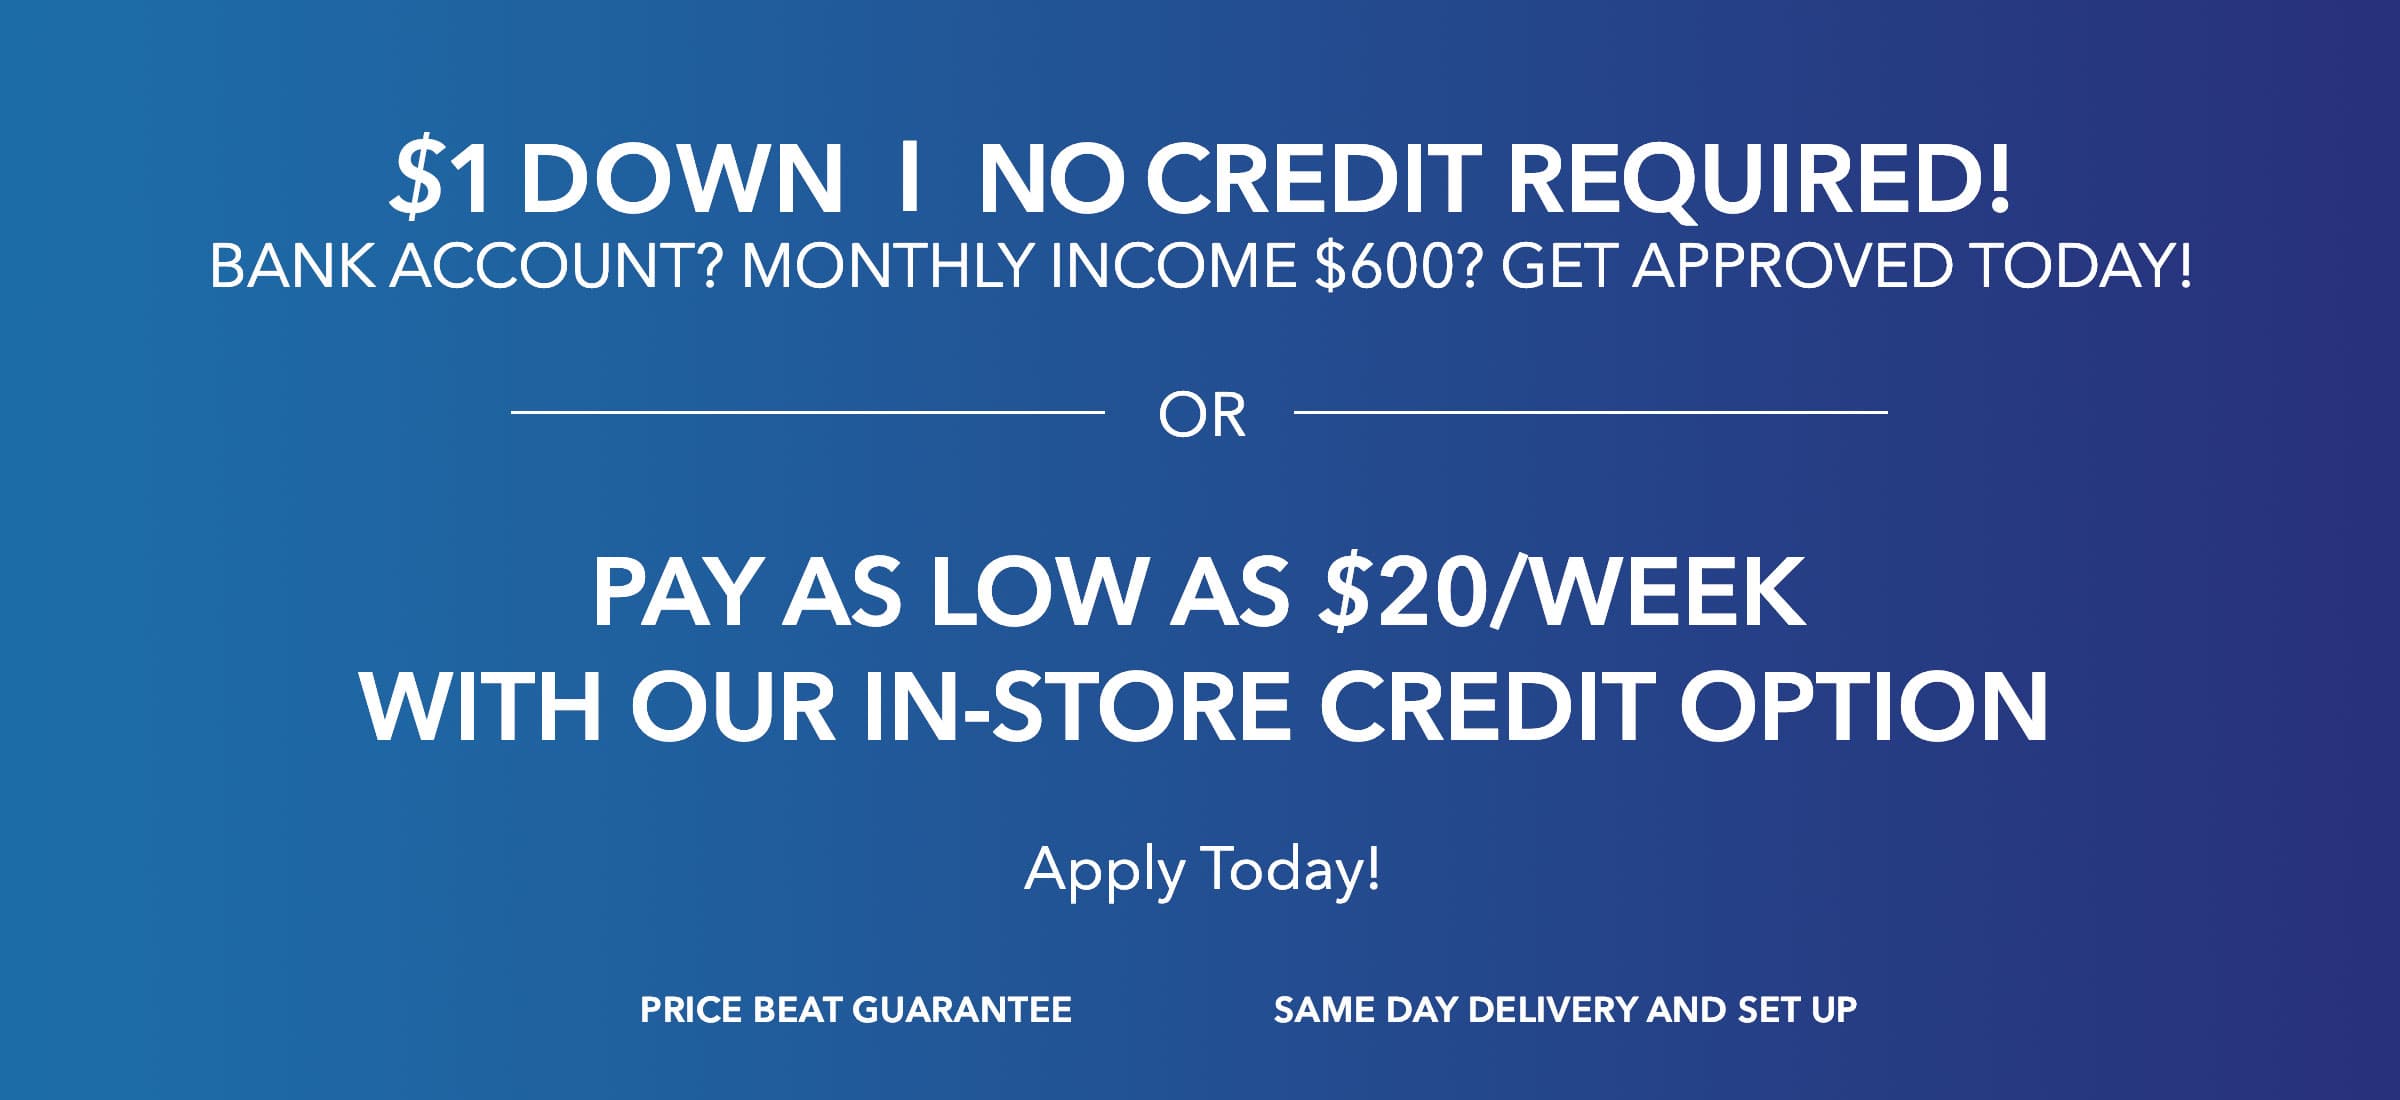 $1 Down | No Credit Required!